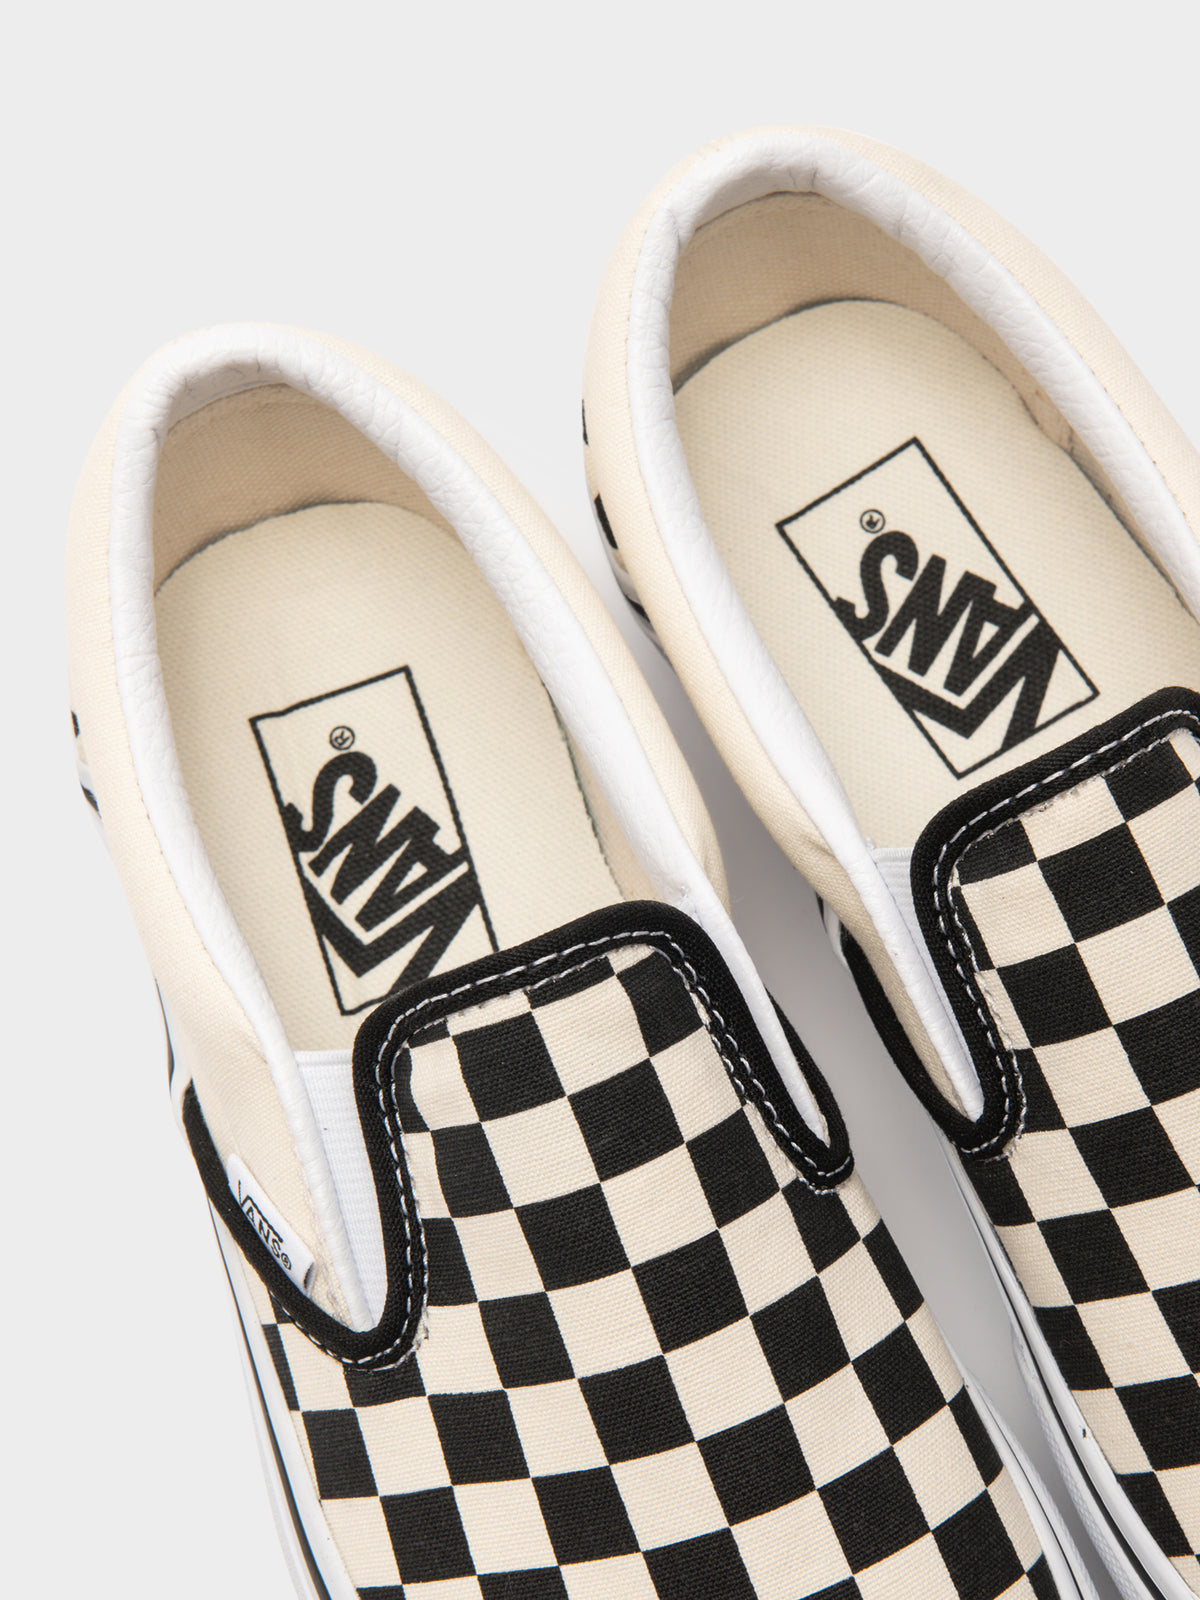 Womens Classic Slip On Platform Sneakers in Black &amp; White Checkerboard